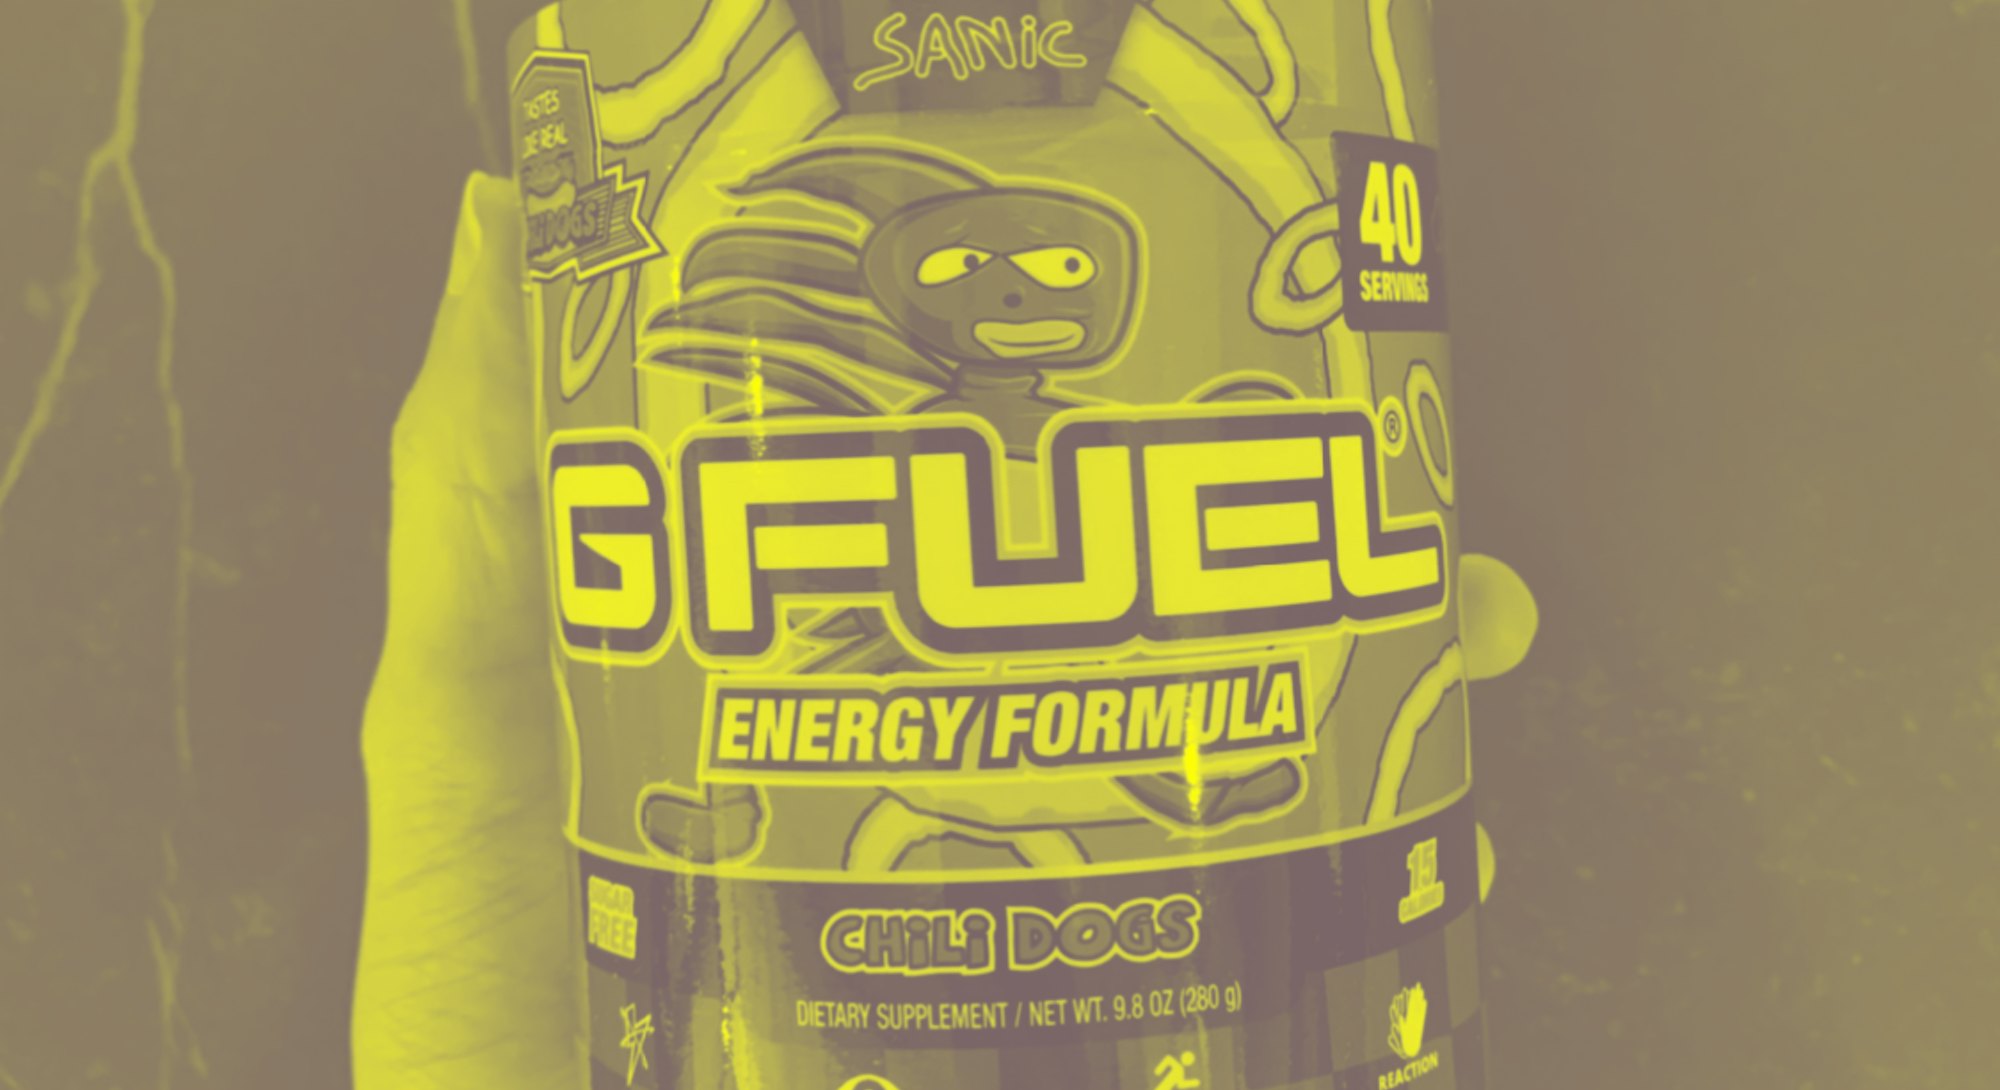 G-Fuel's Sanic-themed energy powder that tastes like chili dogs. Food. Drink. Video games. Gaming. M...